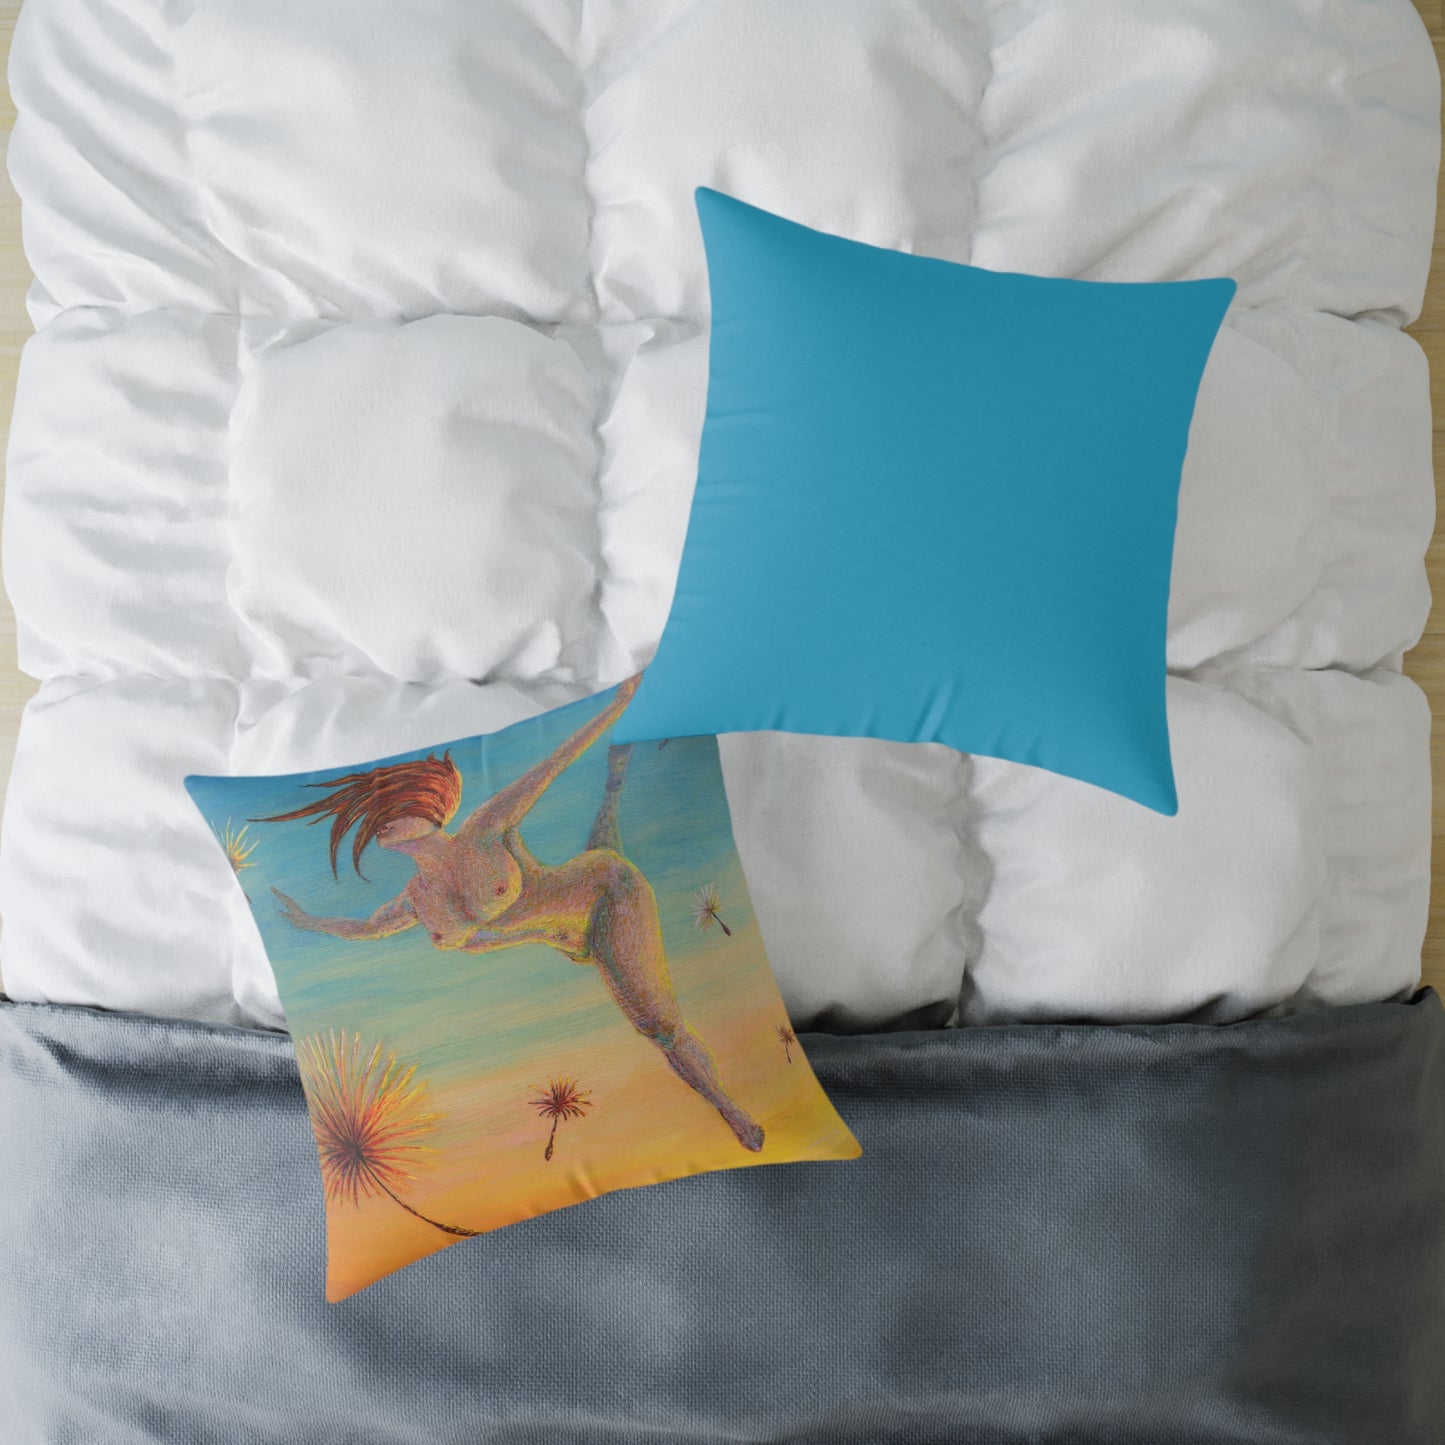 Invigorating Unknown Polyester Pillow